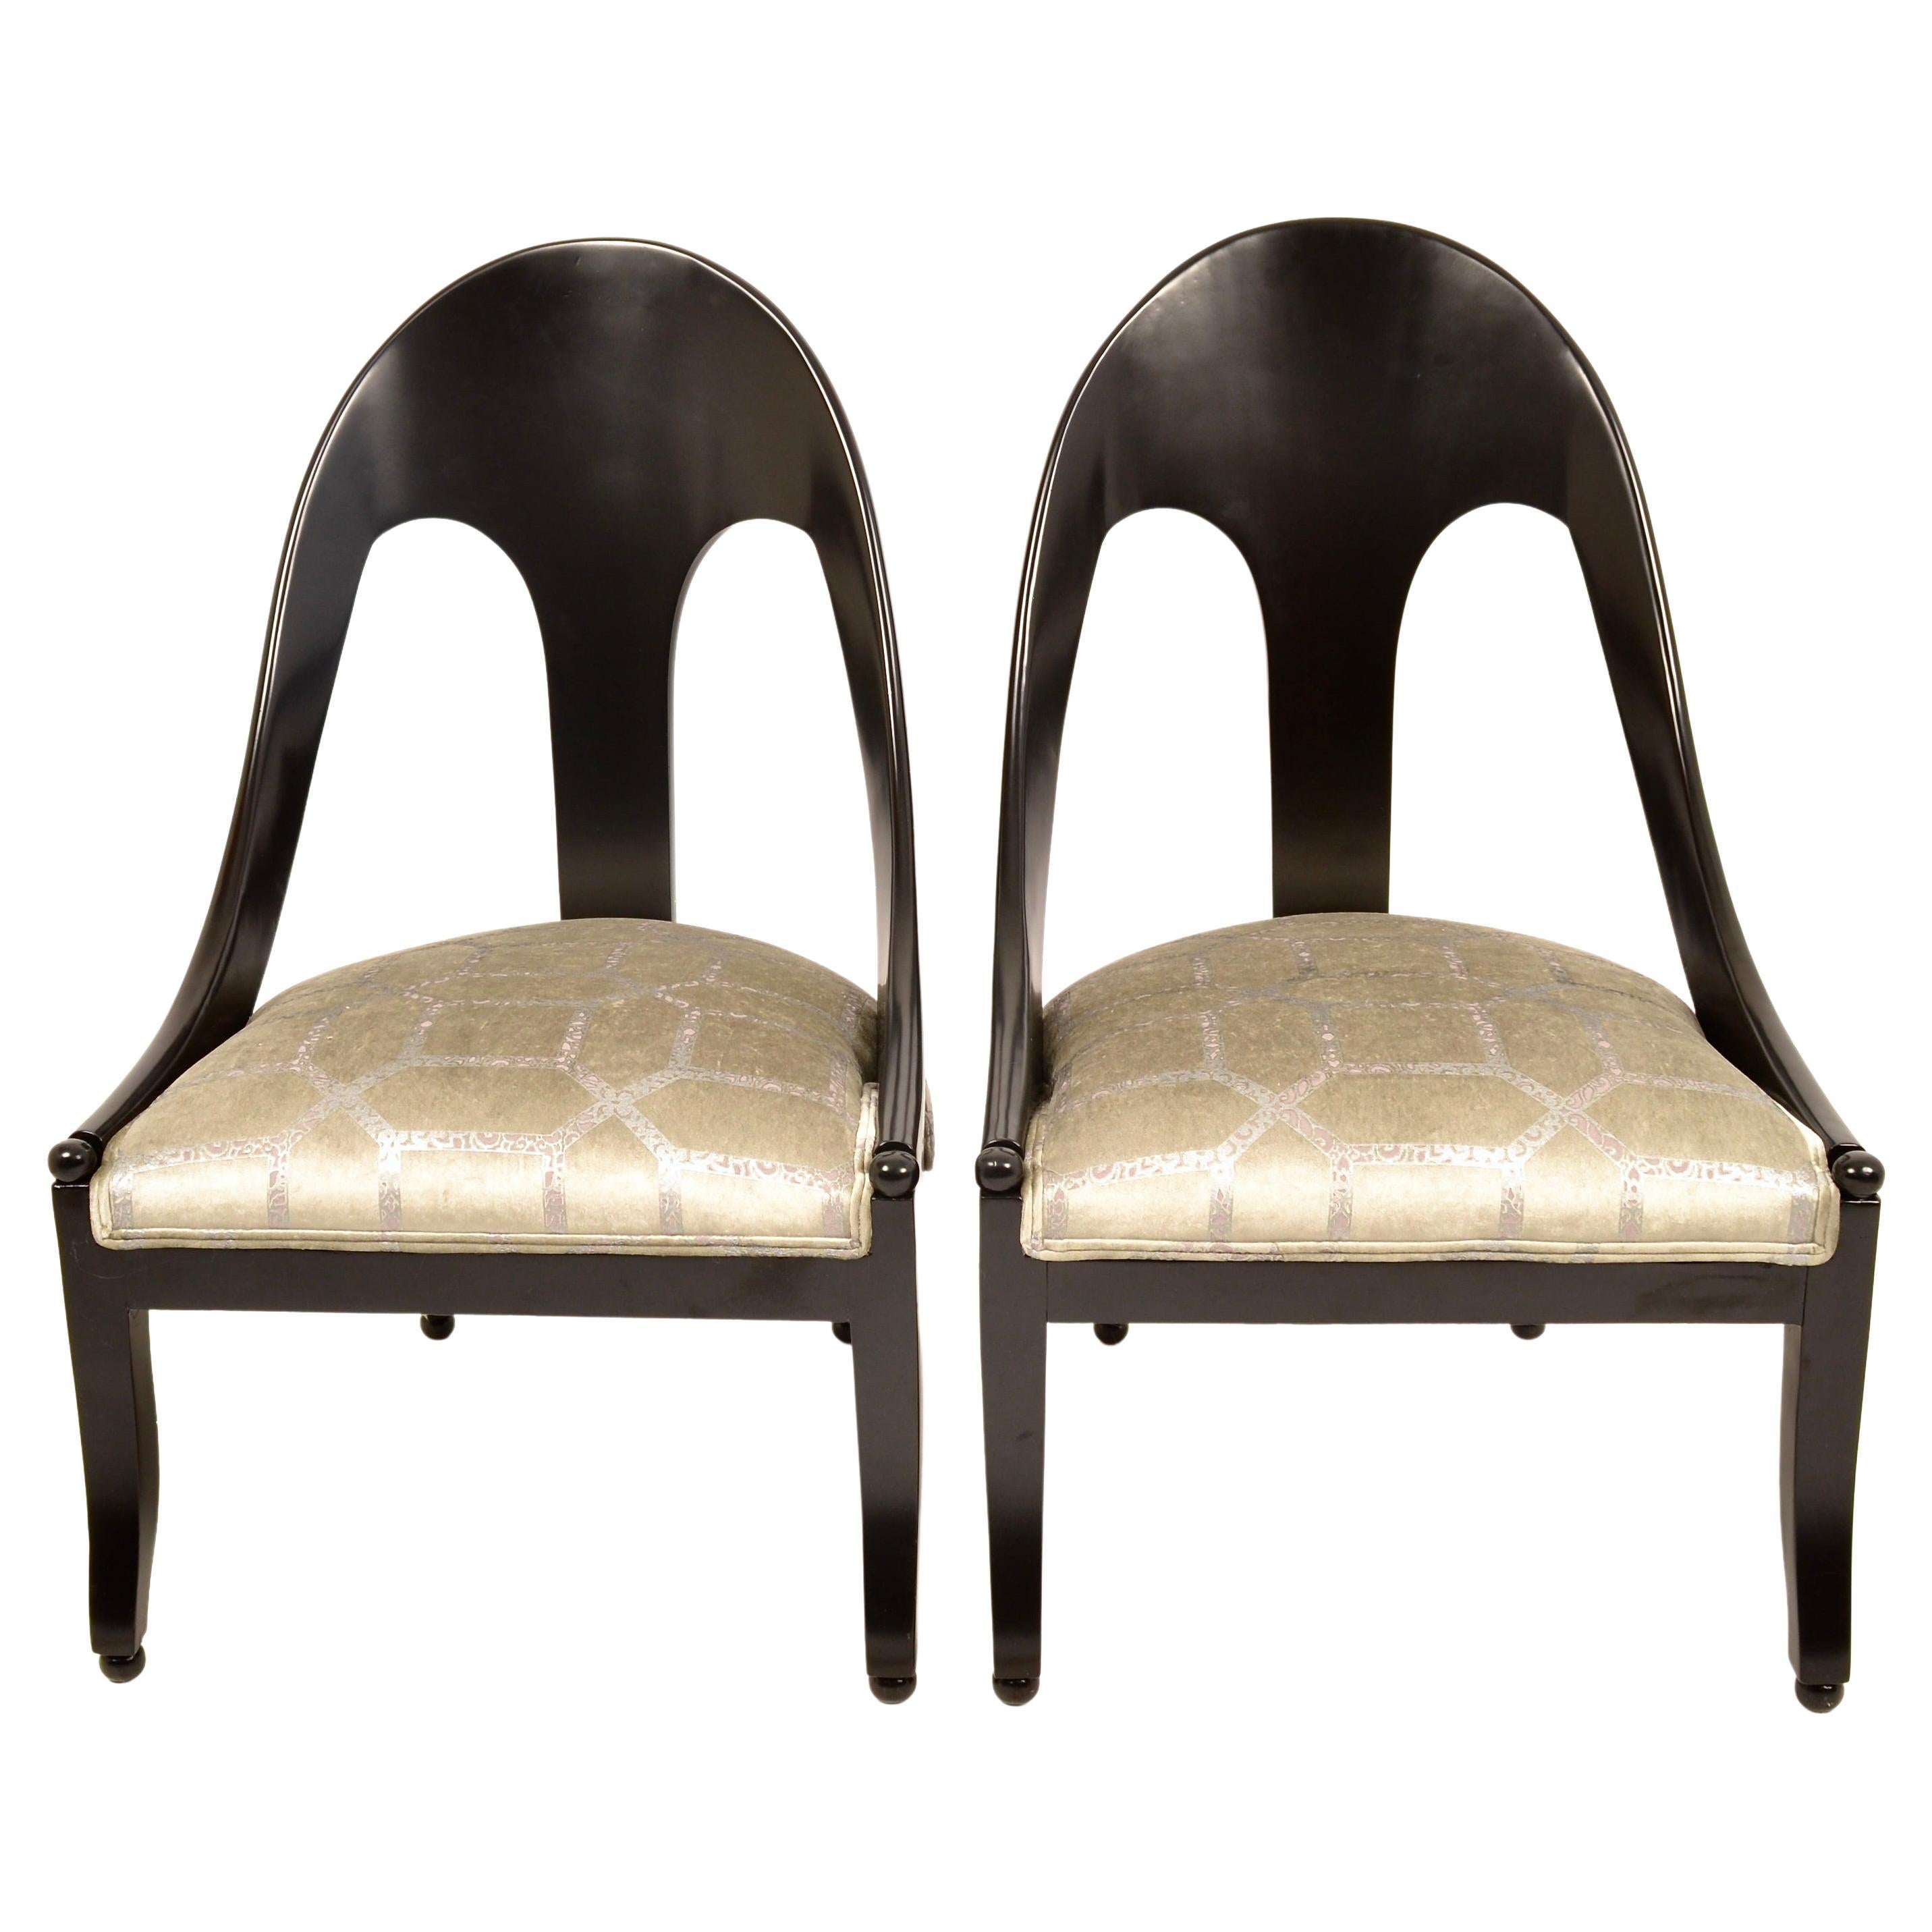 Pair of Spoon Back Slipper Chairs in Black Satin Lacquer